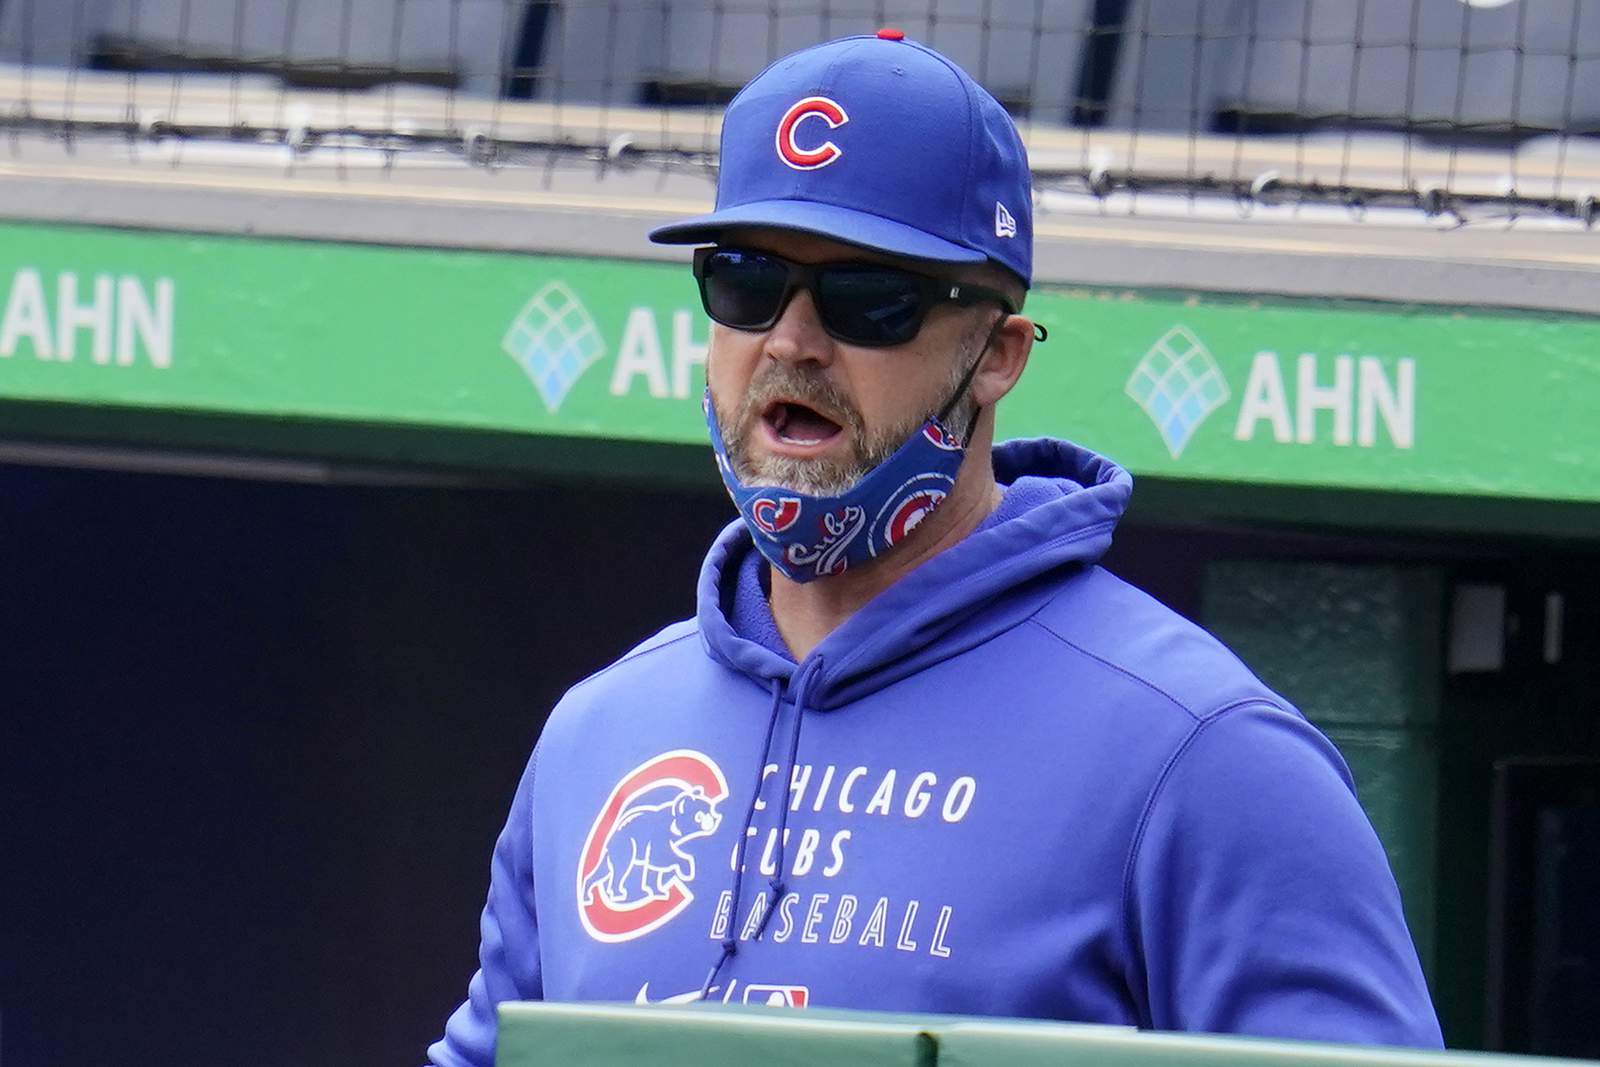 Cubs' Hendricks feeling ill, scratched amid team COVID scare